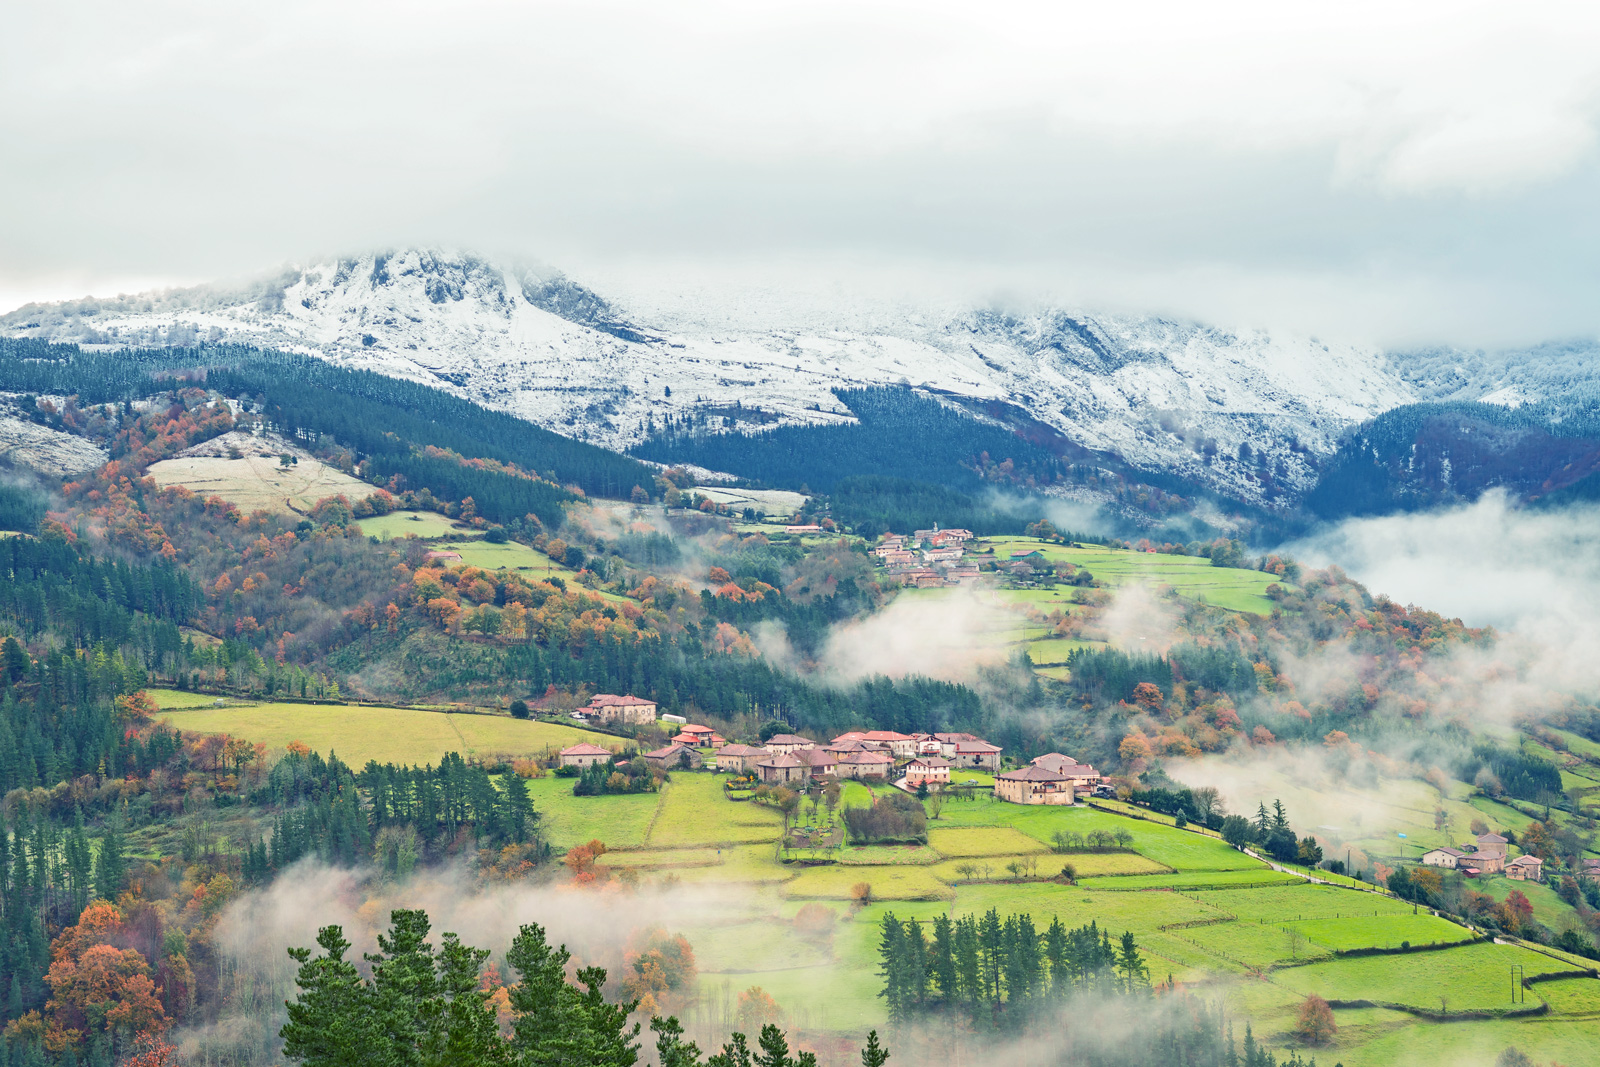 What to do in the Basque Country when it's cold?